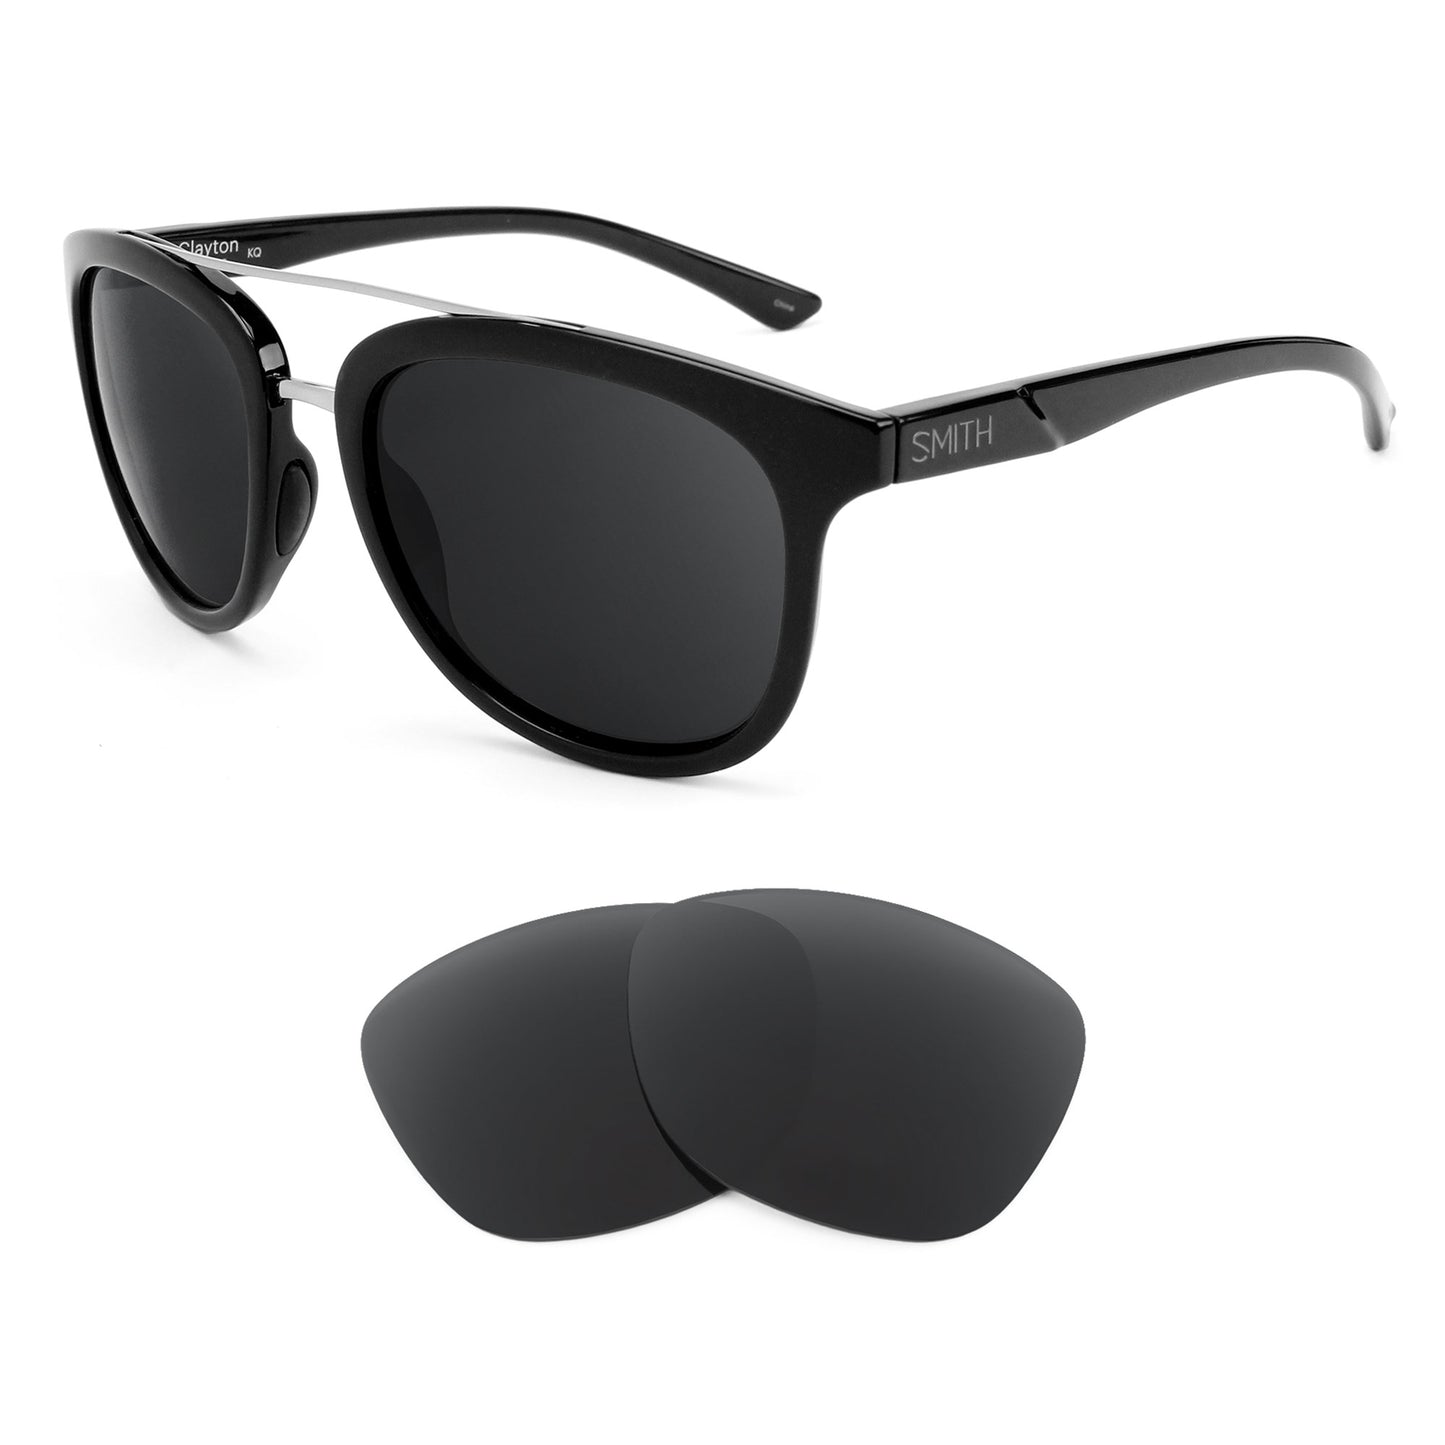 Smith Clayton sunglasses with replacement lenses